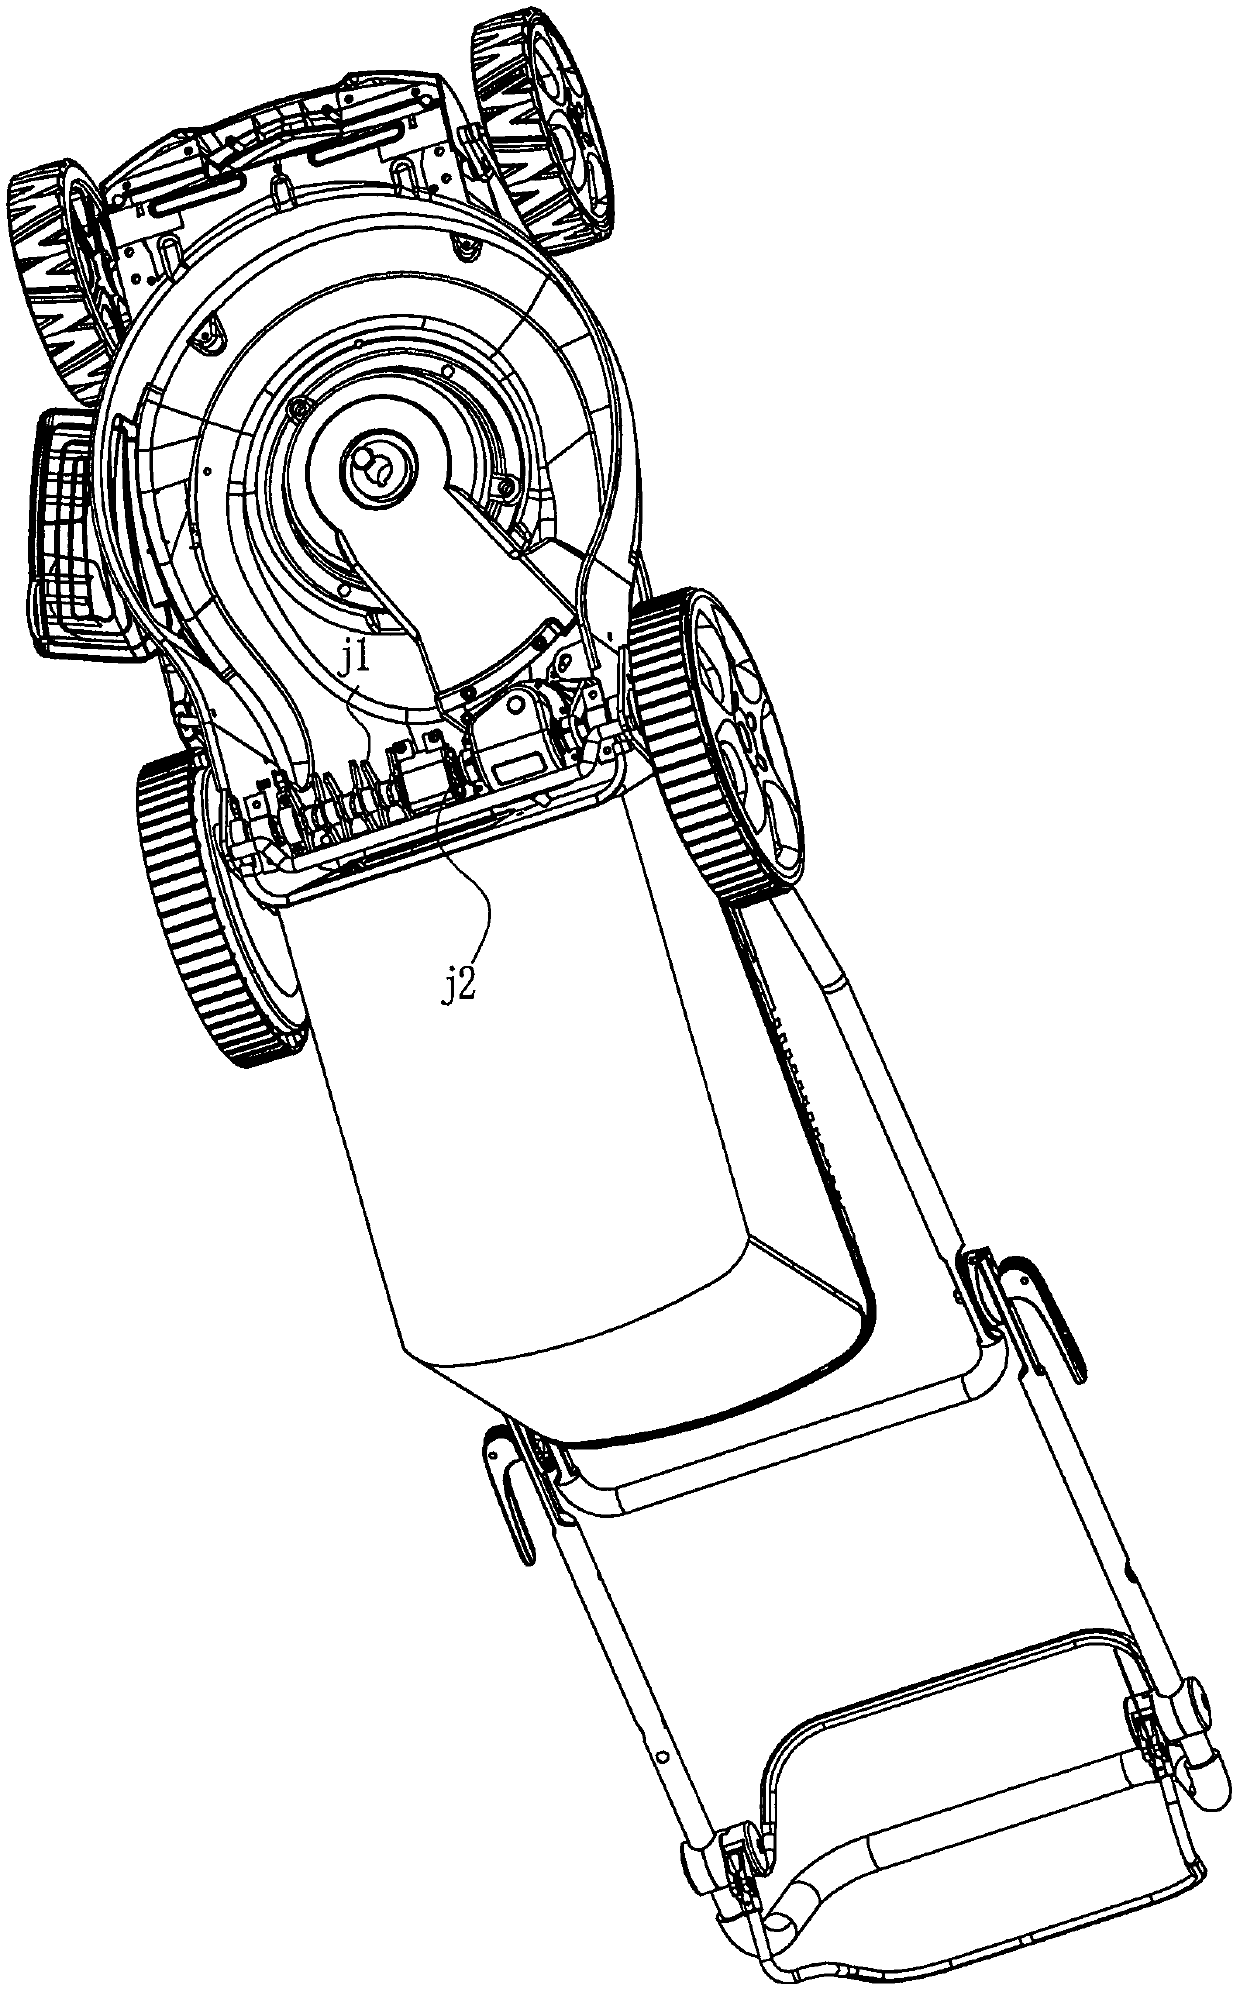 Mower with handrails capable of folding inwards simply and elastically